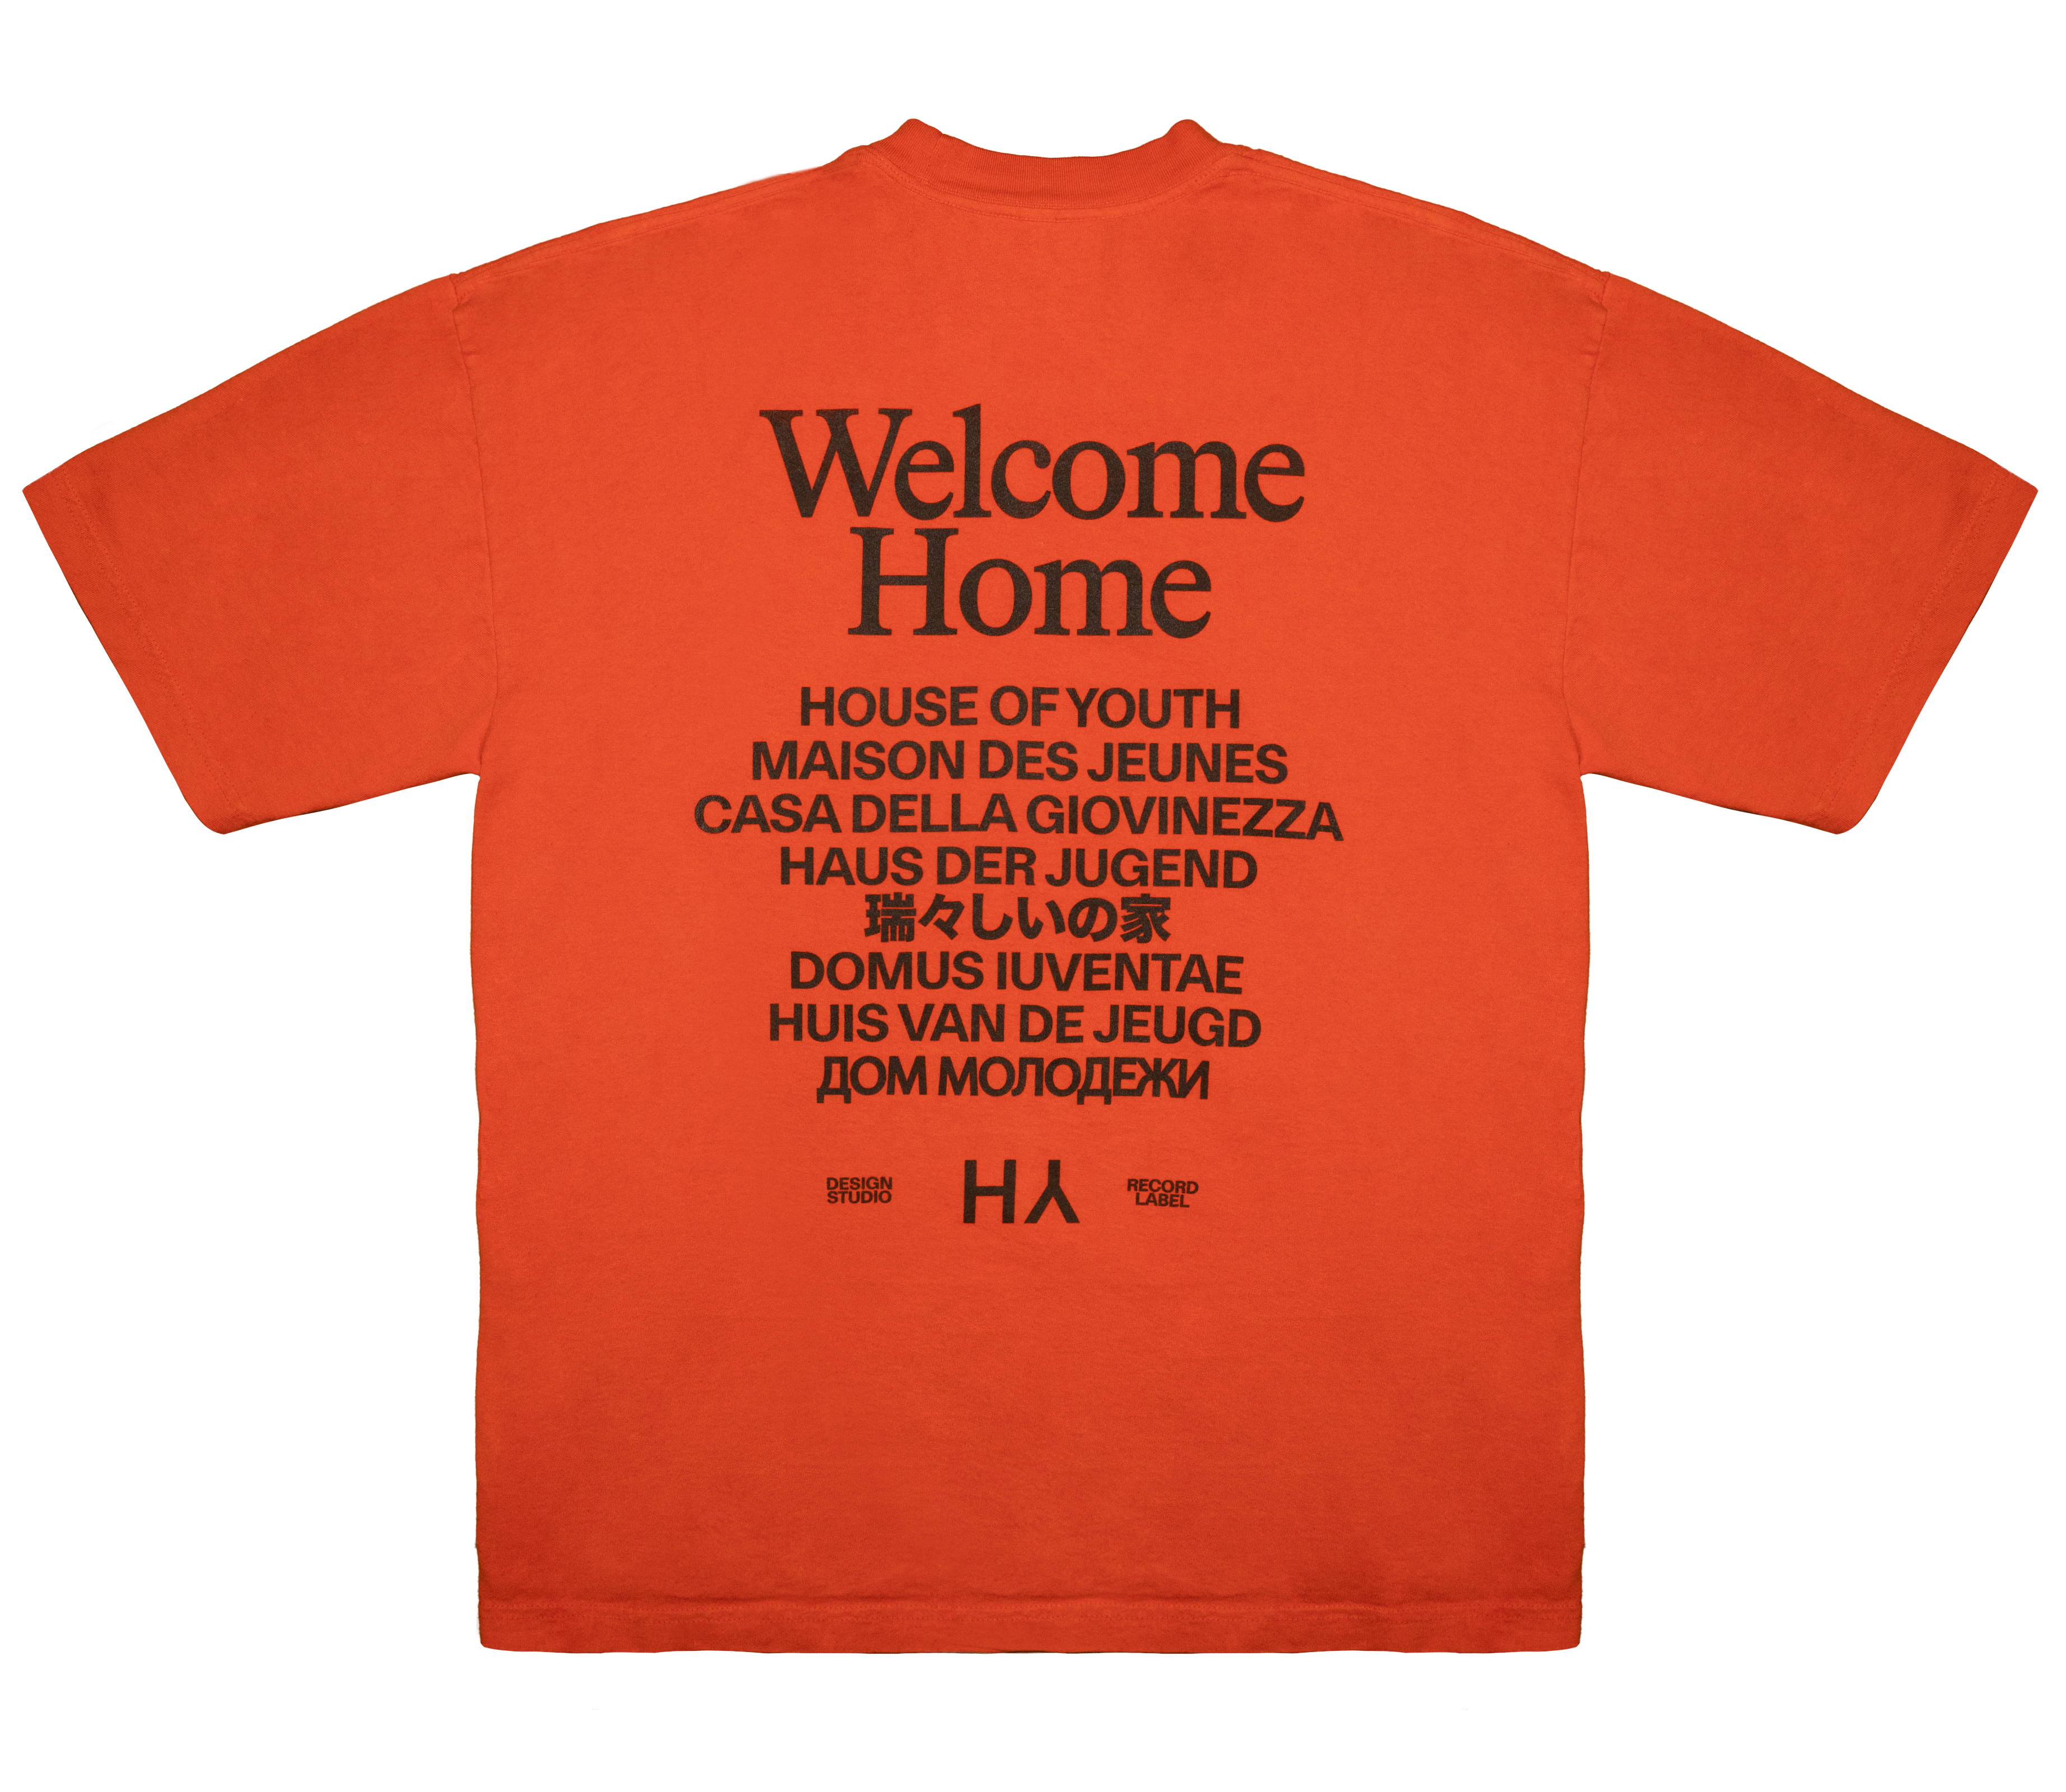 'Welcome Home' T-Shirt